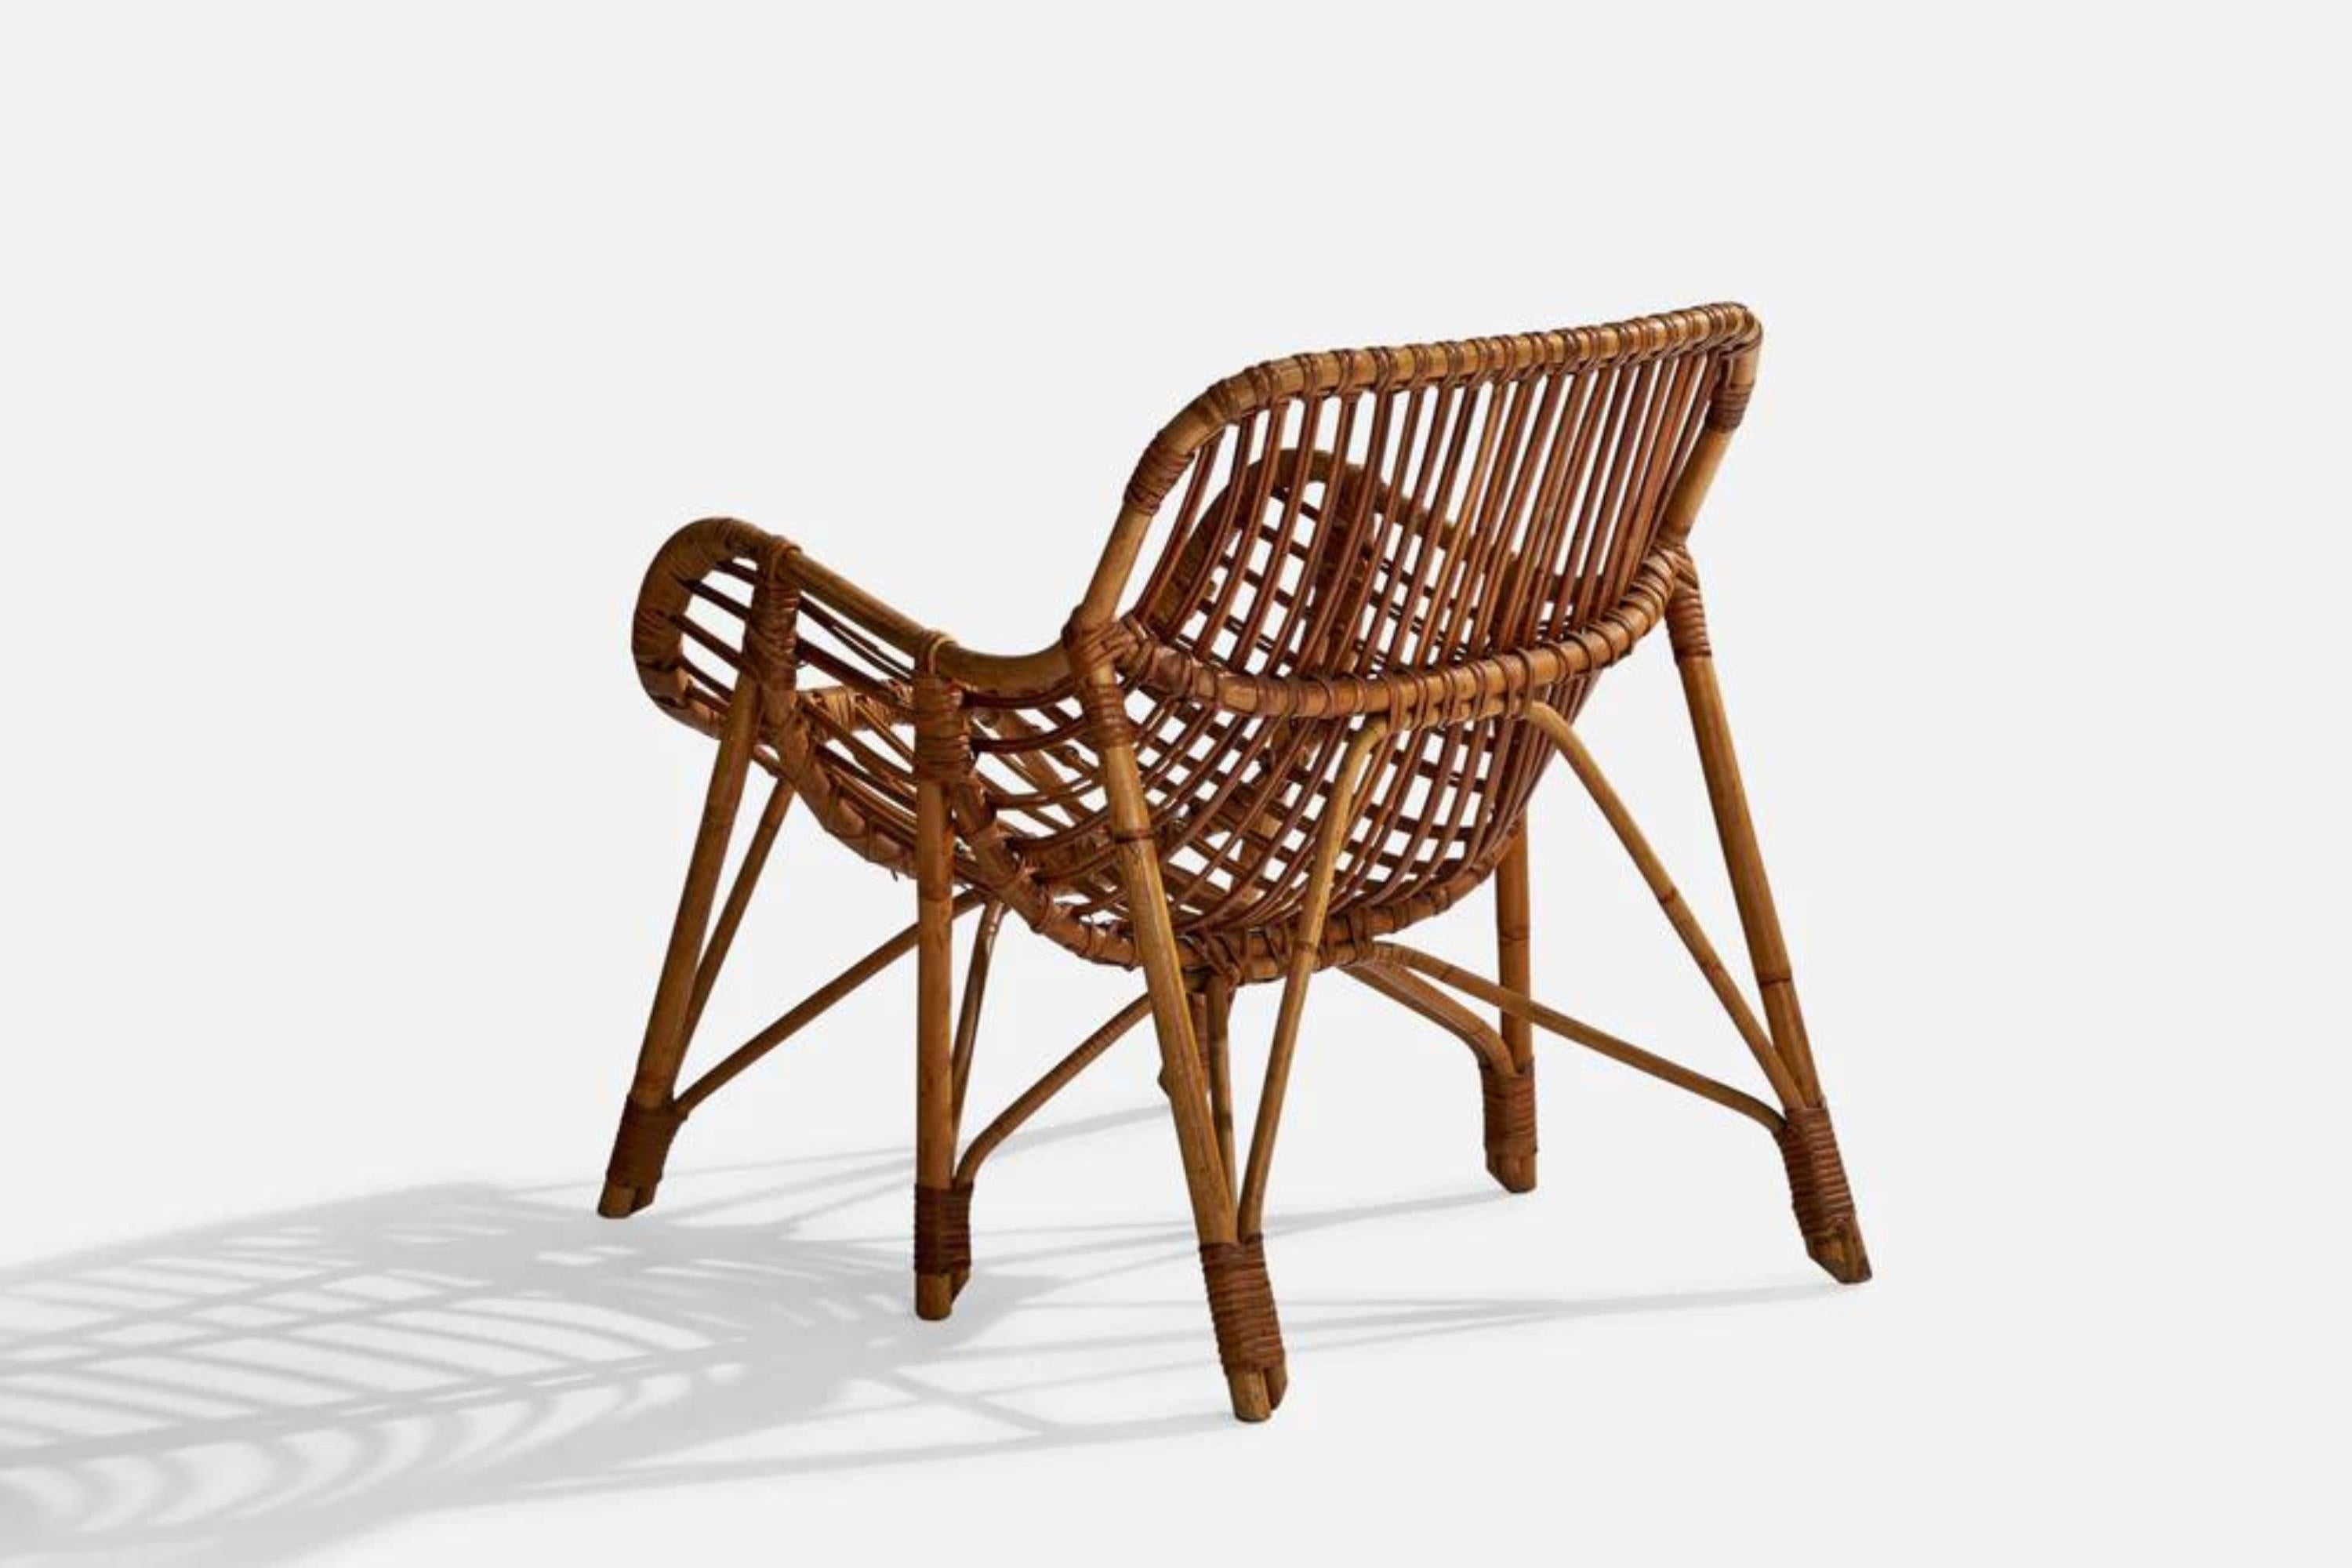 Mid-20th Century Finnish Designer, Lounge Chair, Bamboo, Rattan, Finland, 1940s For Sale